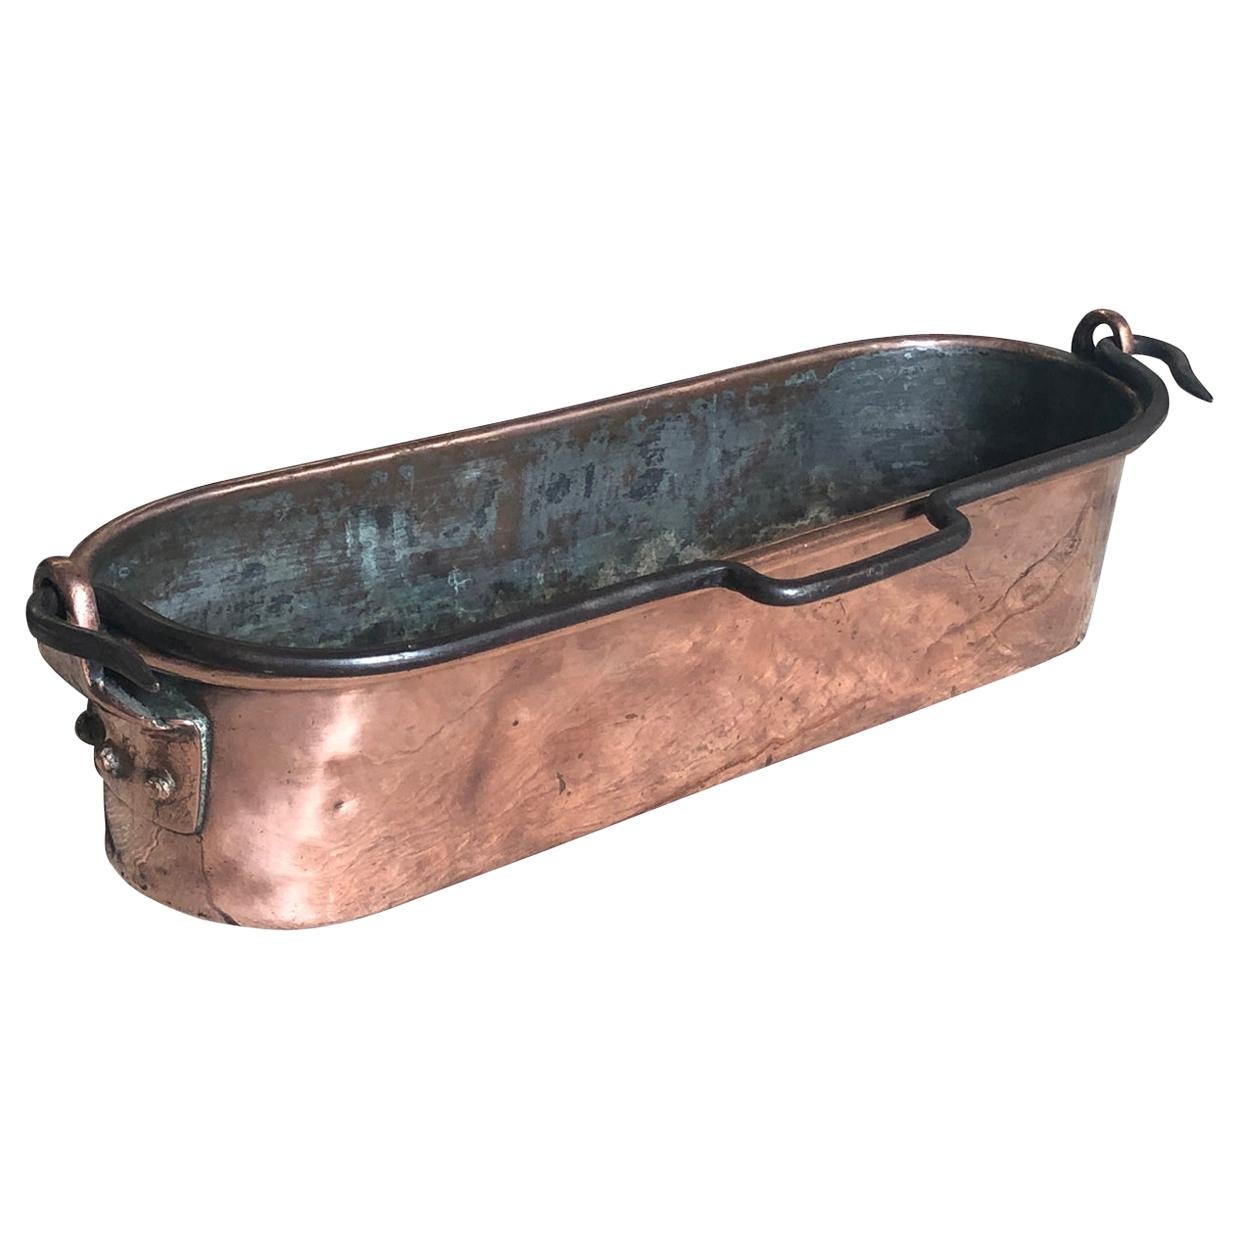 French Early 19th Century Copper Fish Pan